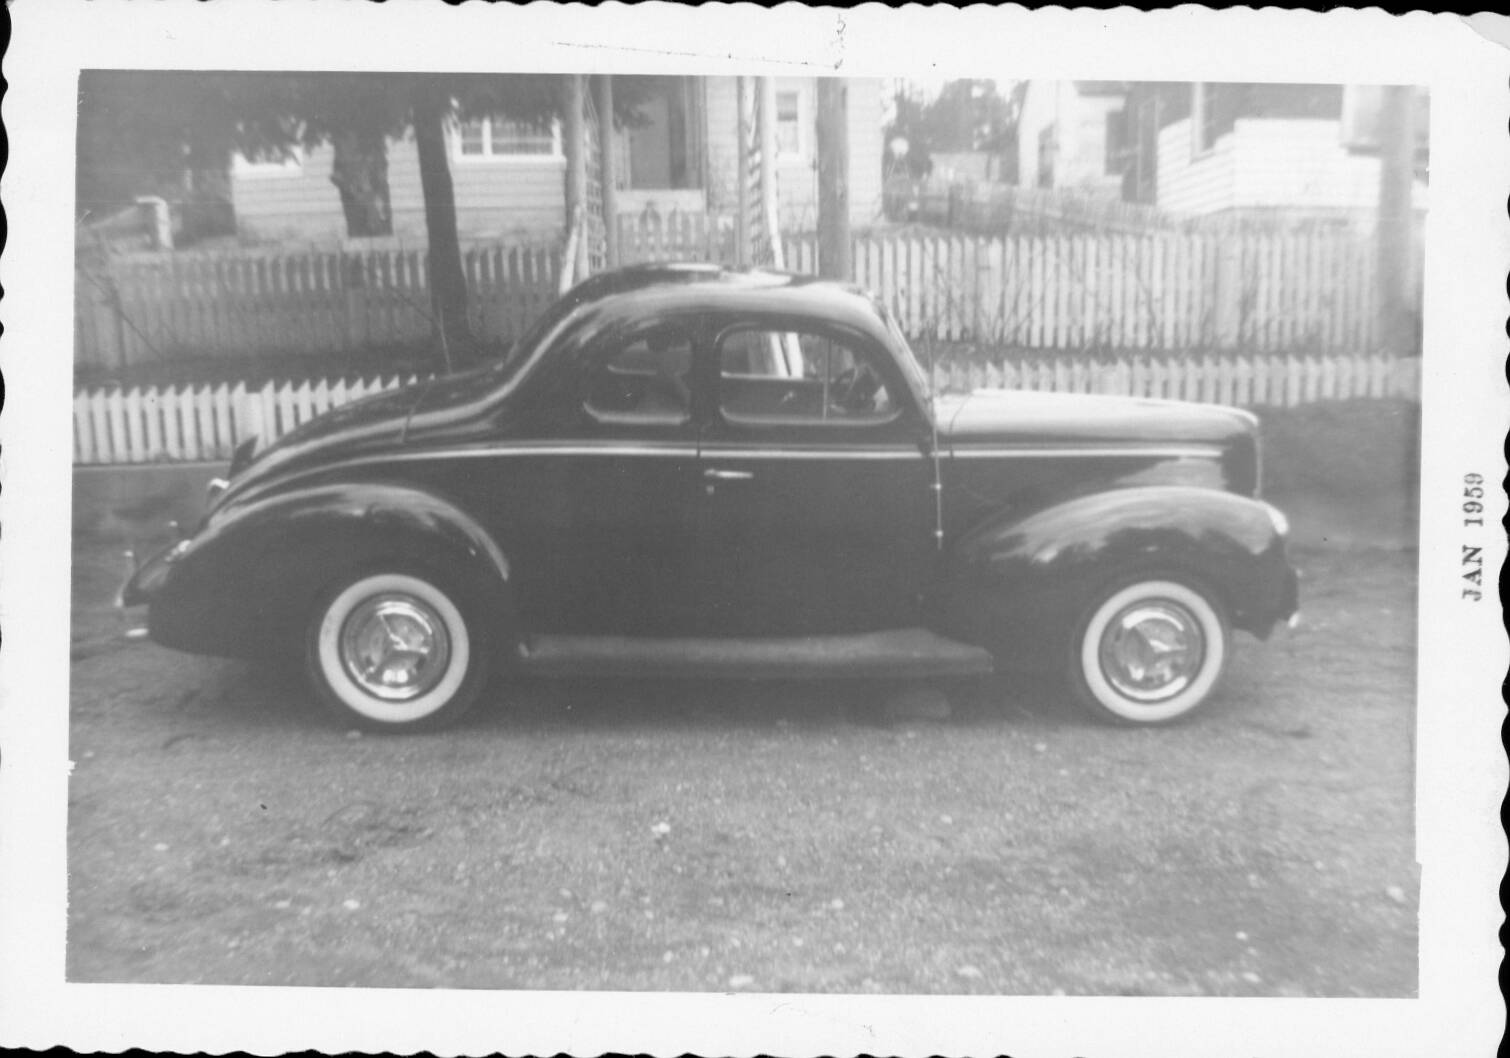 Barker's first 1940 Standard Ford Coupe.